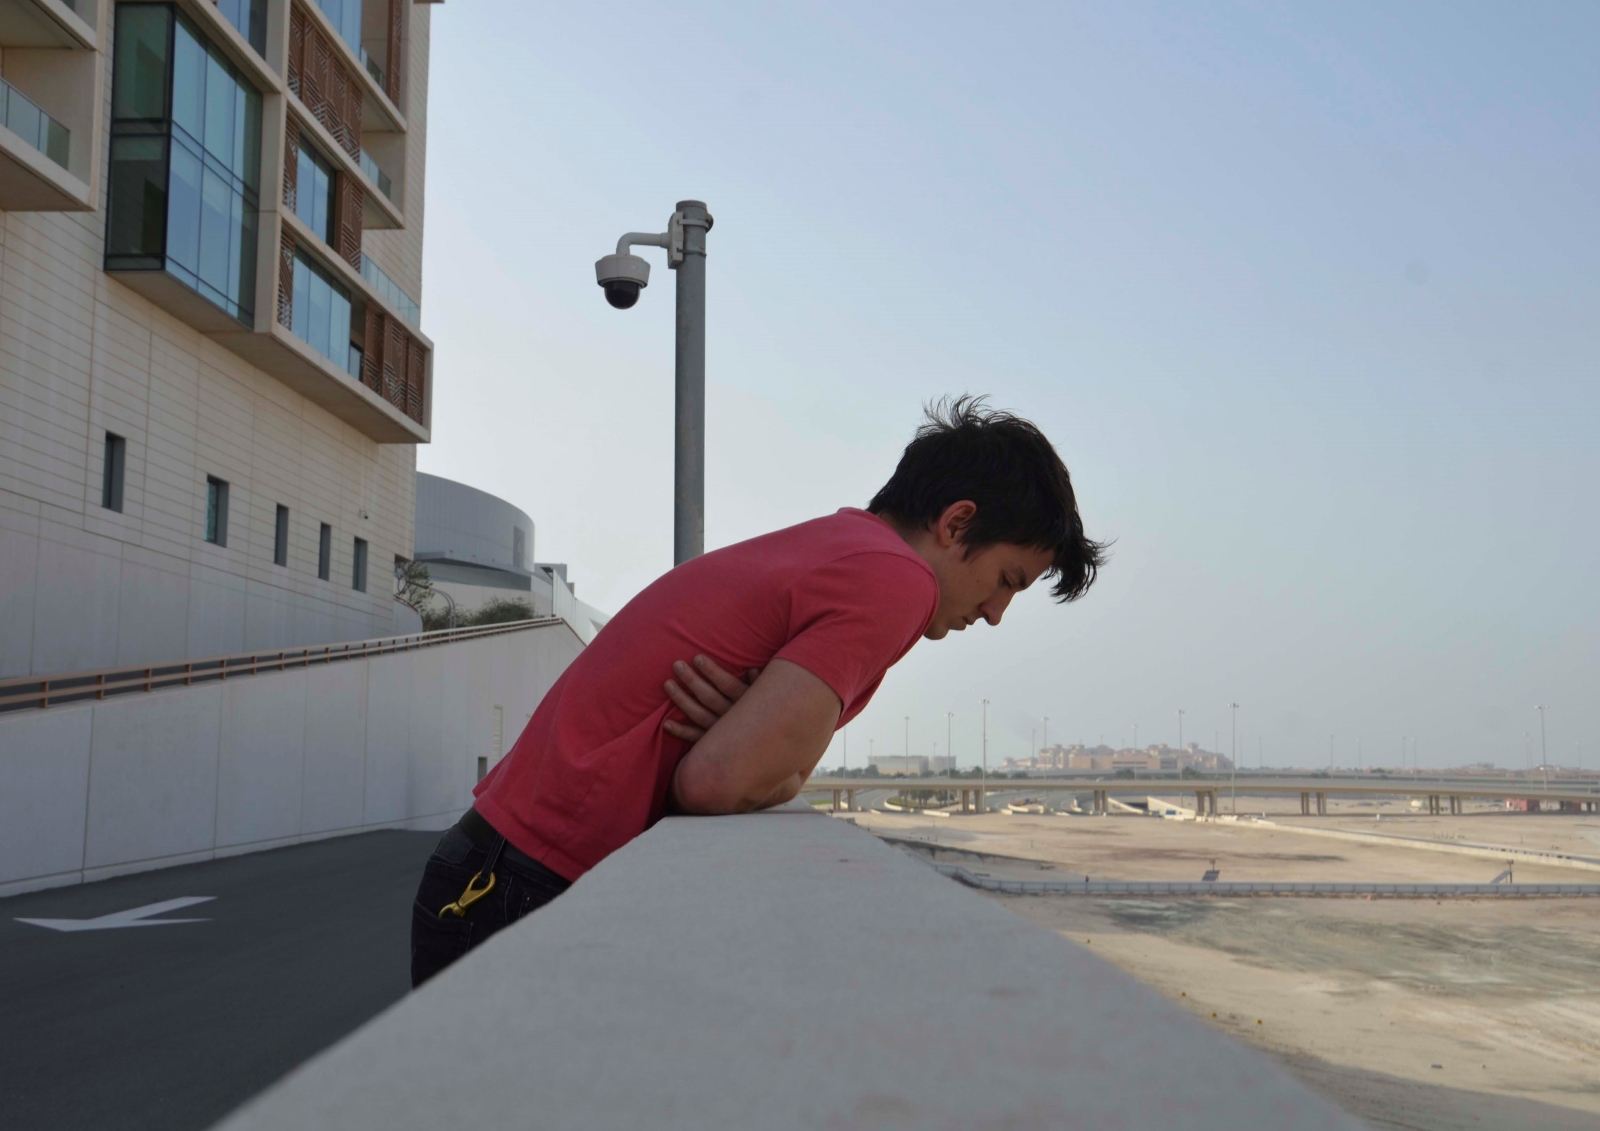 A man in a pink shirt leans over the edge of a wall. A surveillance camera can be seen behind him.